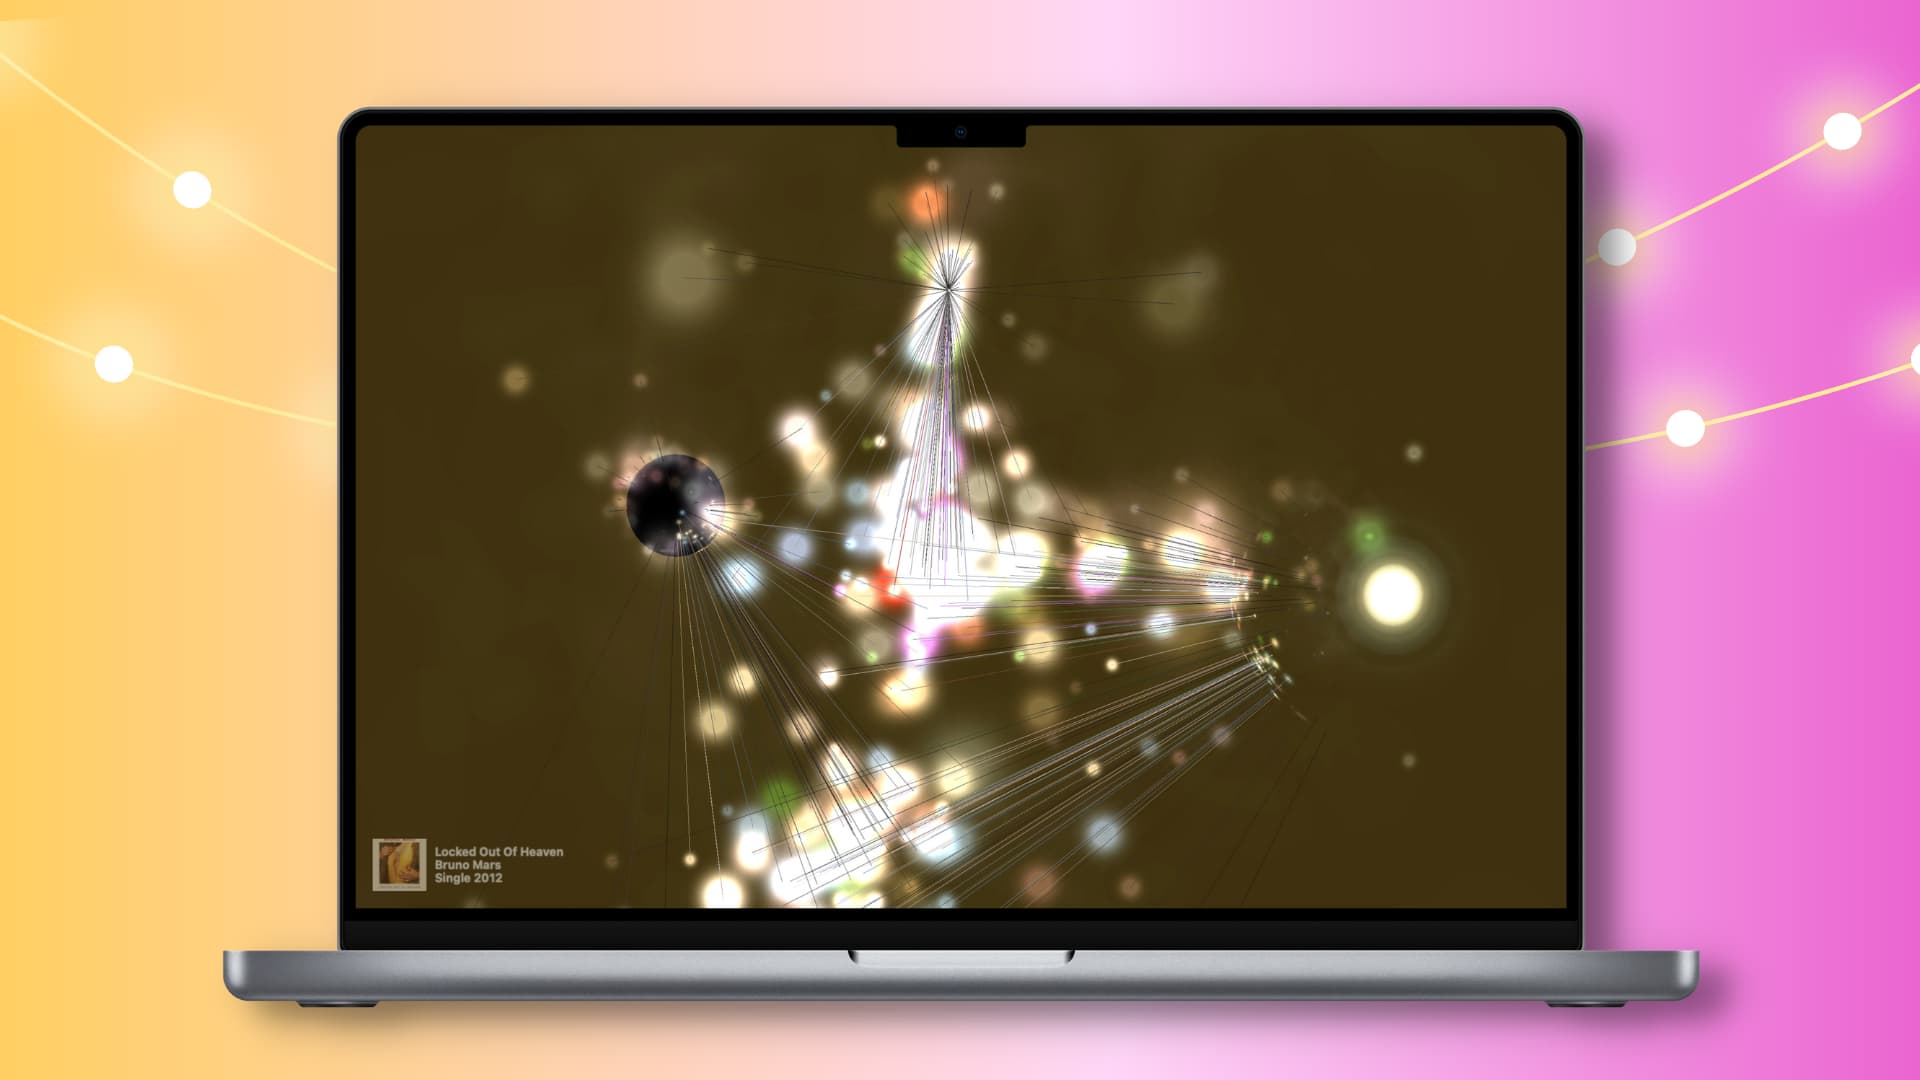 Visualizer in the Music app on Mac